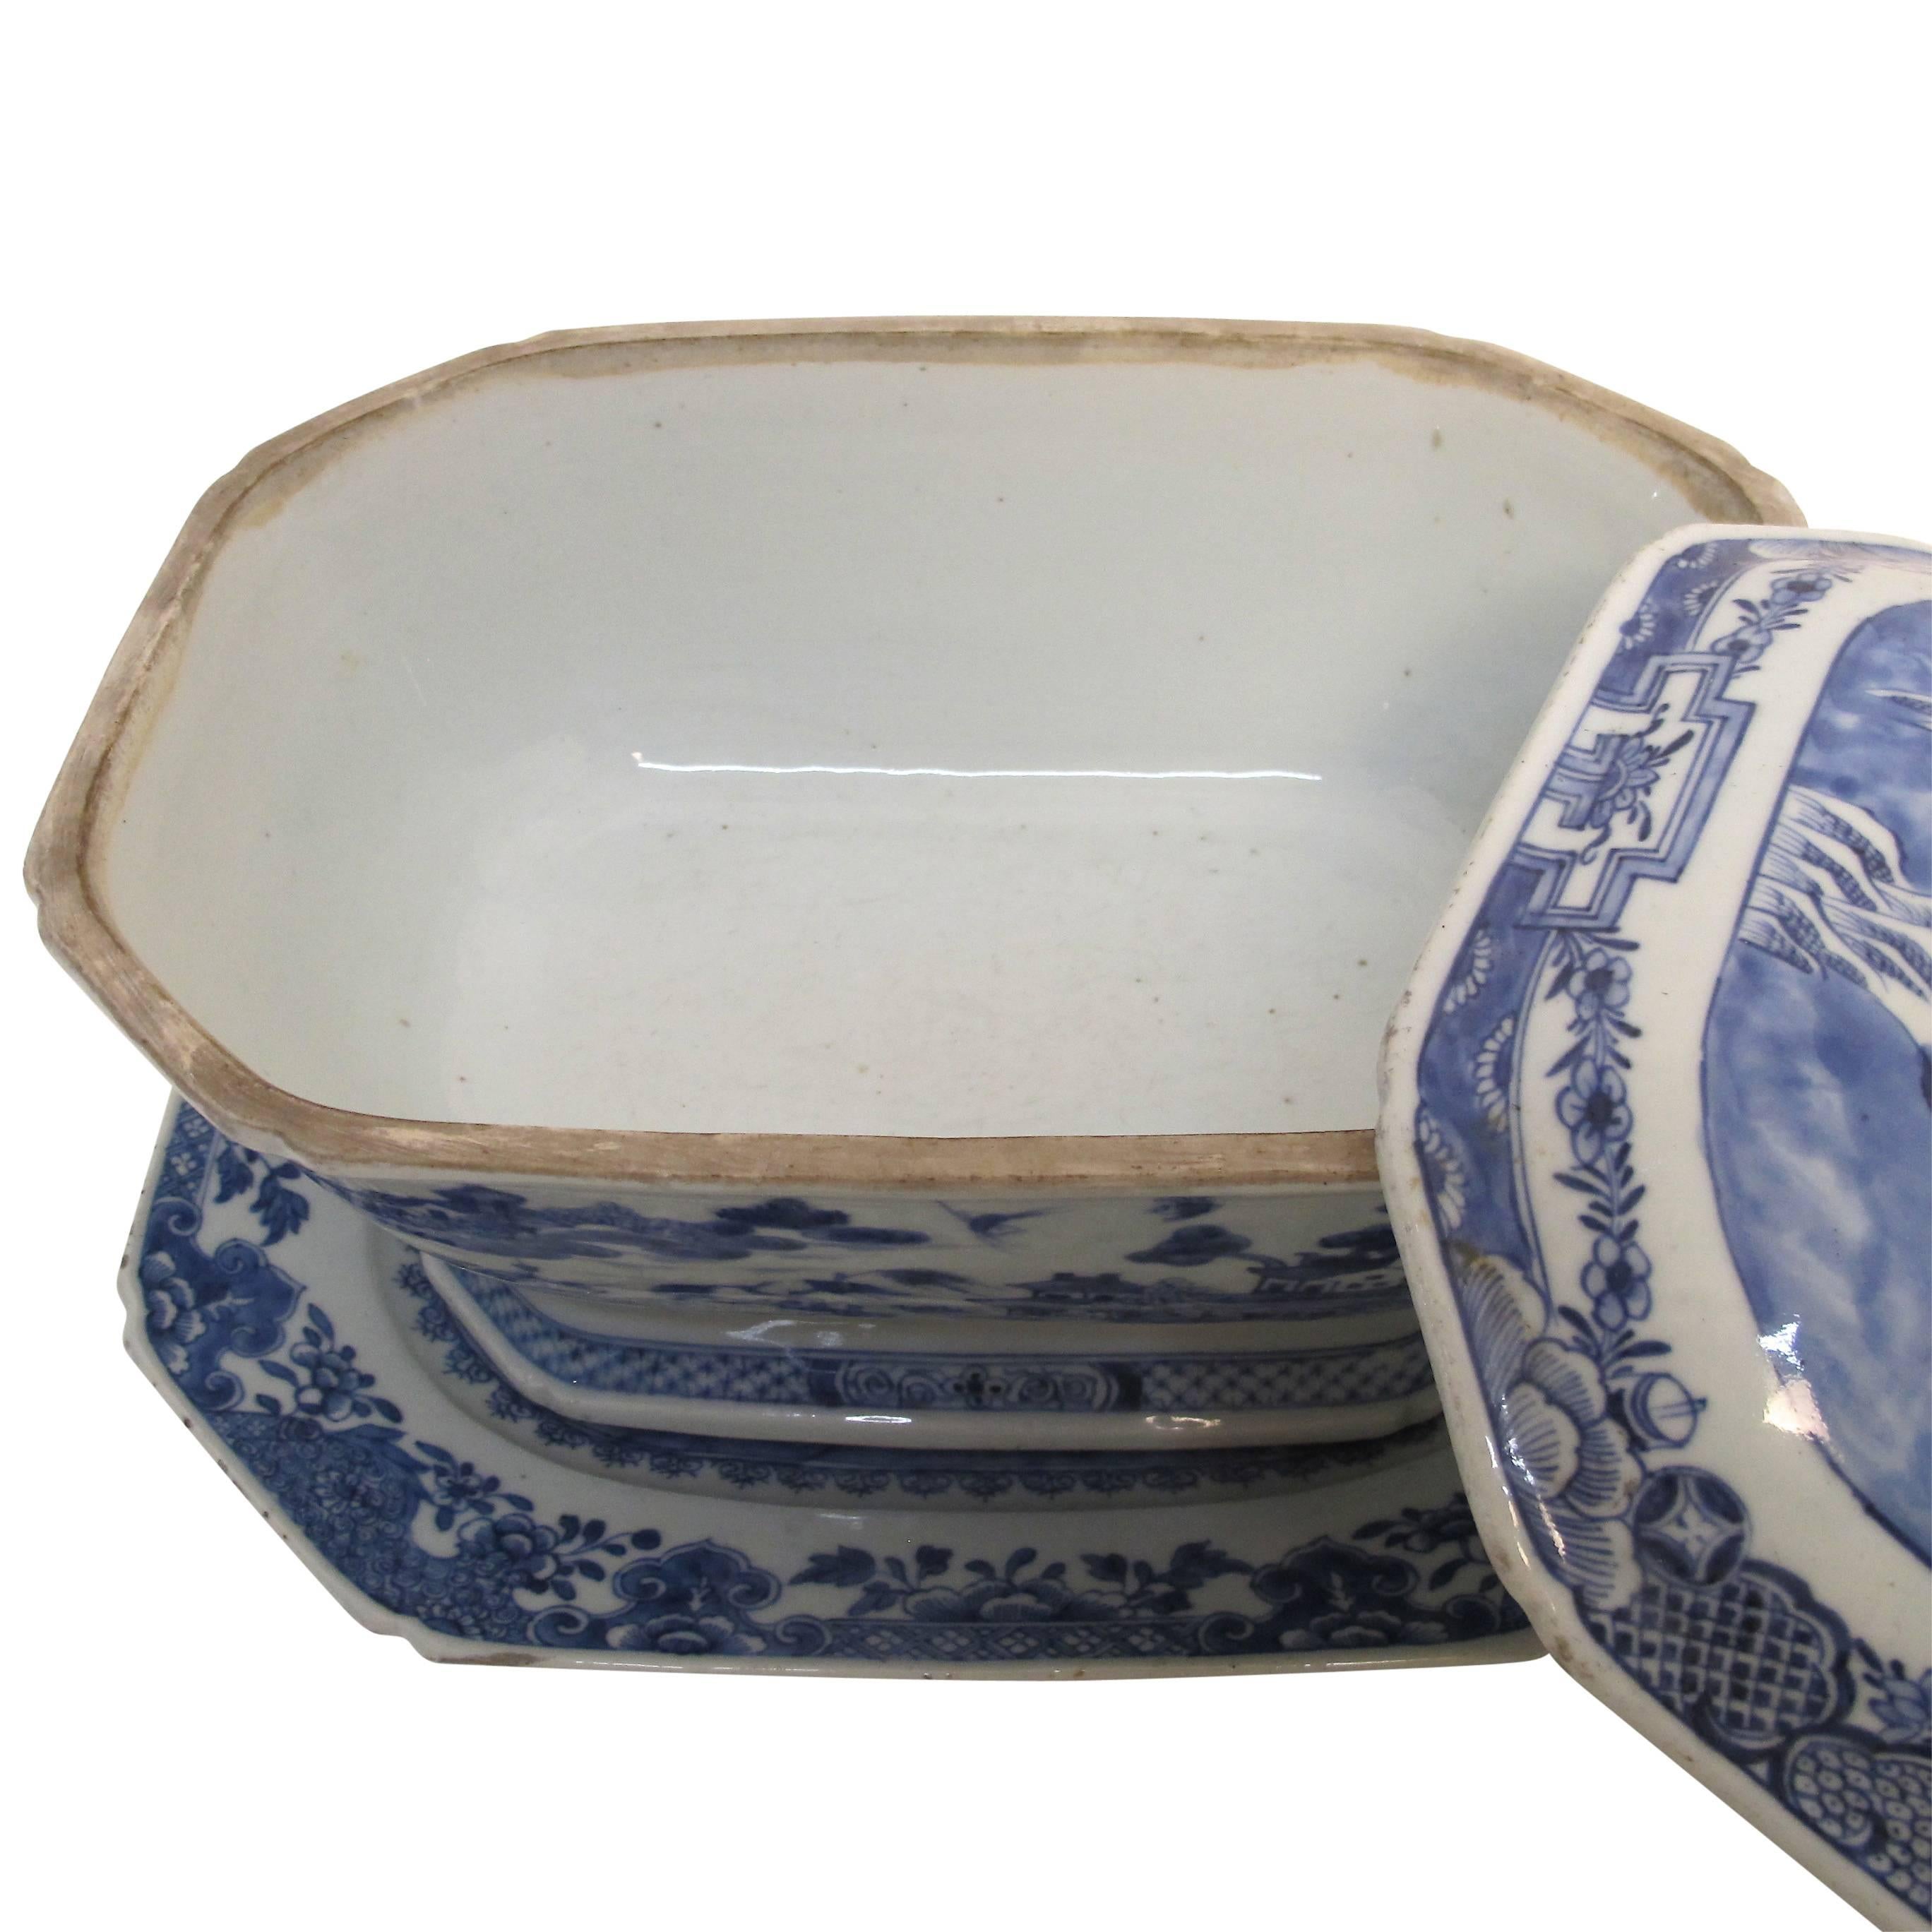 Blue and white Nanking ware lidded tureen with under plate. Chinese export, early 19th century.
Additional measurements for platter are 13 inches wide x 10.25 deep x 1.25 high.
There is a small chip on the rim of the tureen, platter has several